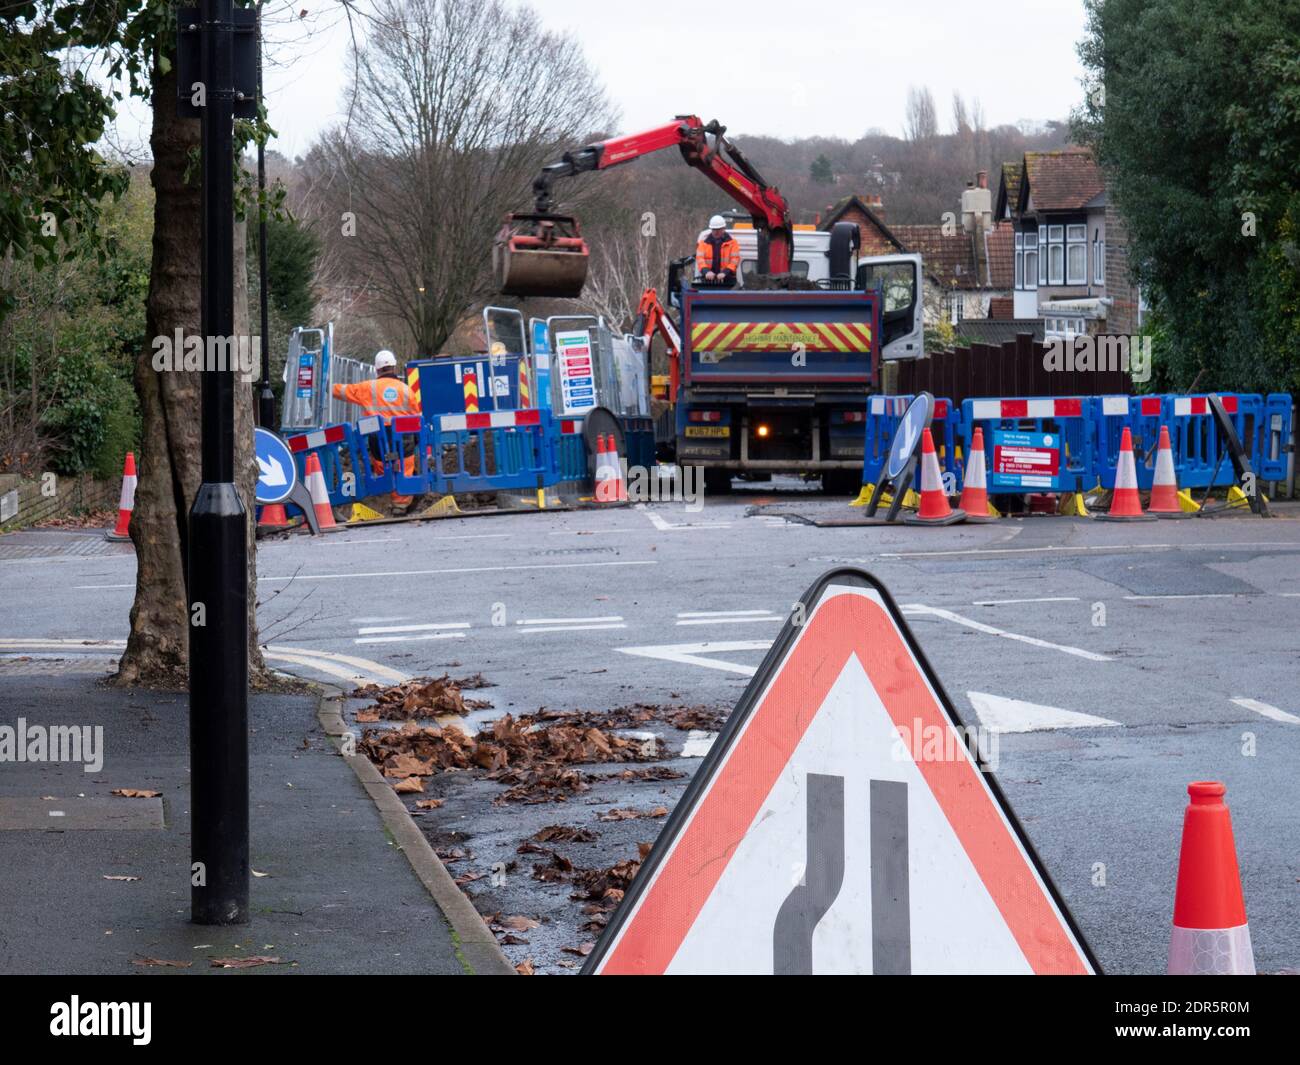 Thames Water dig holes in the road to lay pipes with truck mounted excavator Stock Photo